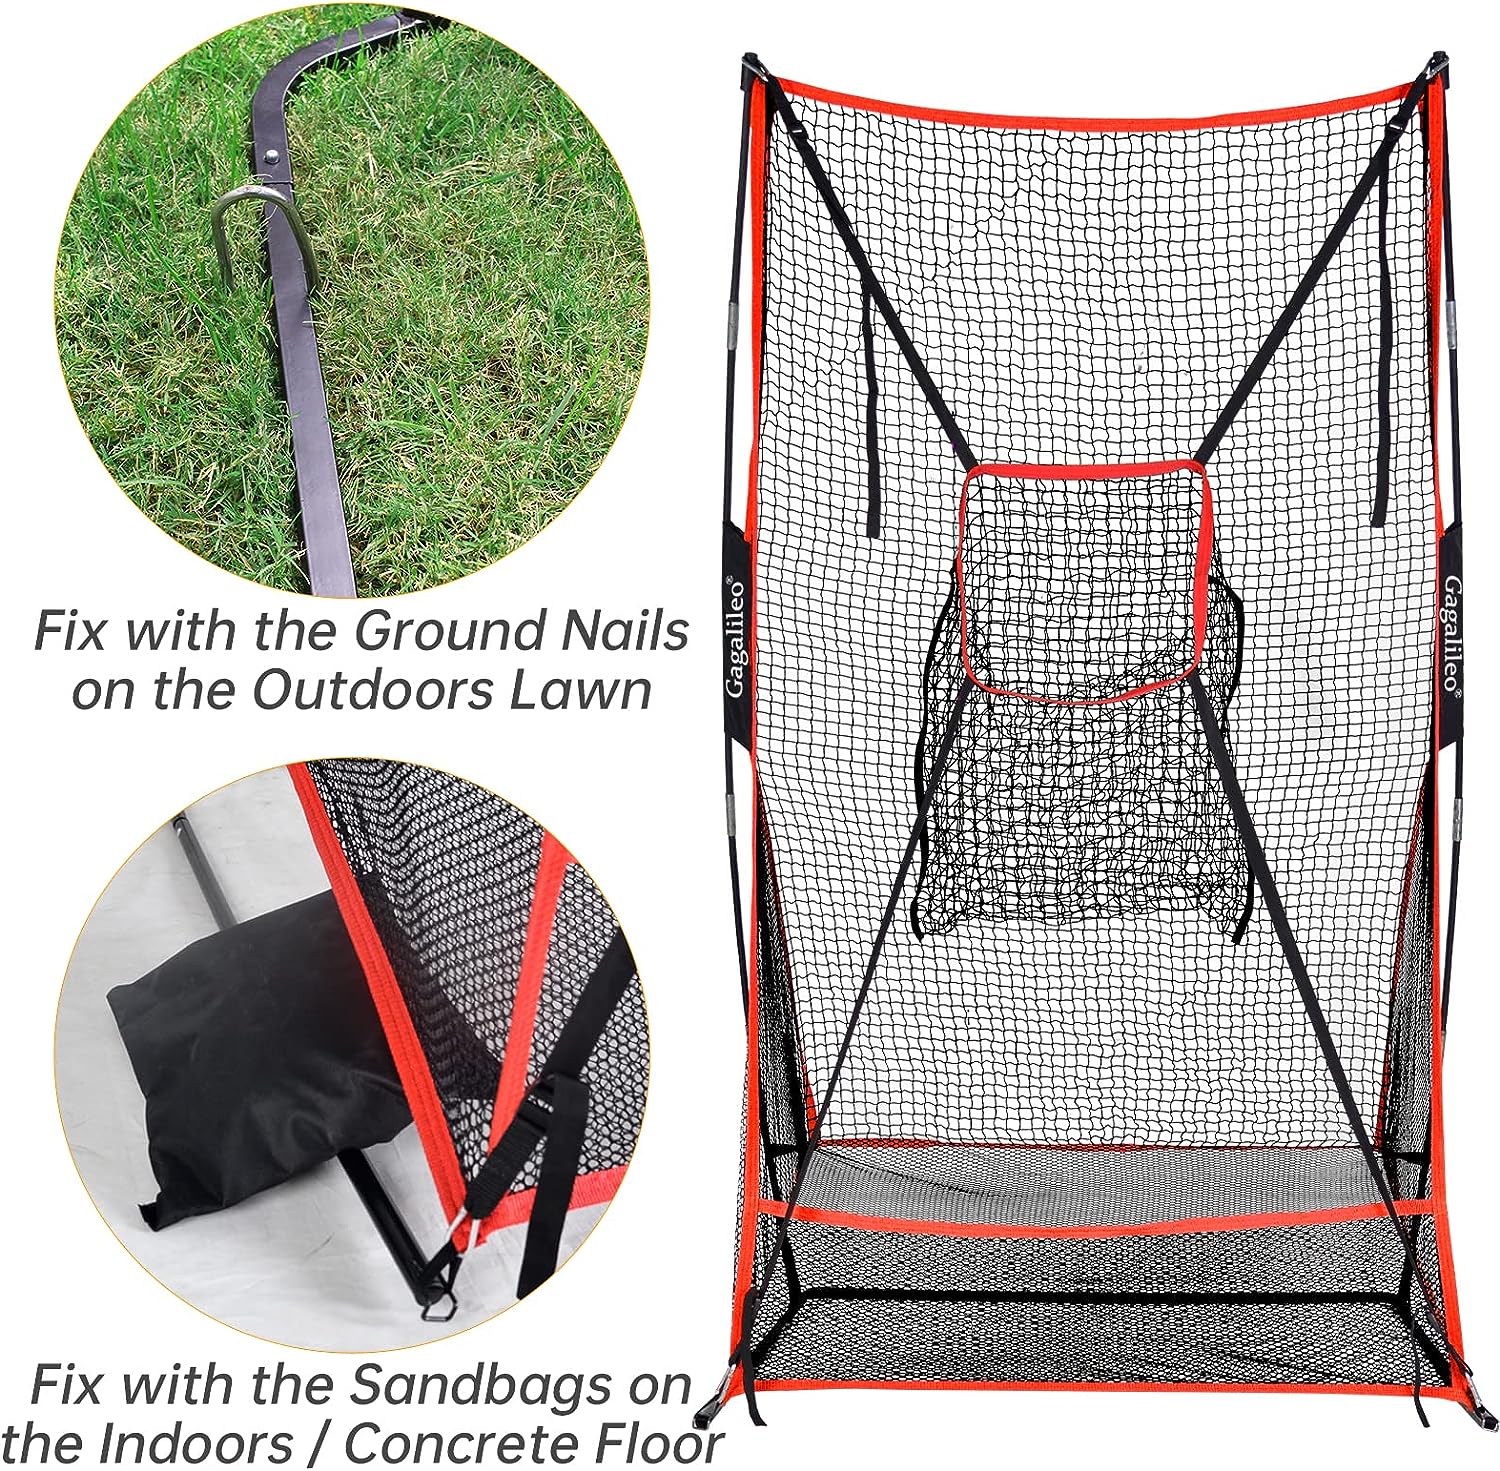 Football Kicking Cage,Football Throwing Net 3x6FT,Football Target Net,Football Training Equipment for Backyard,Mutil-Sports Availble